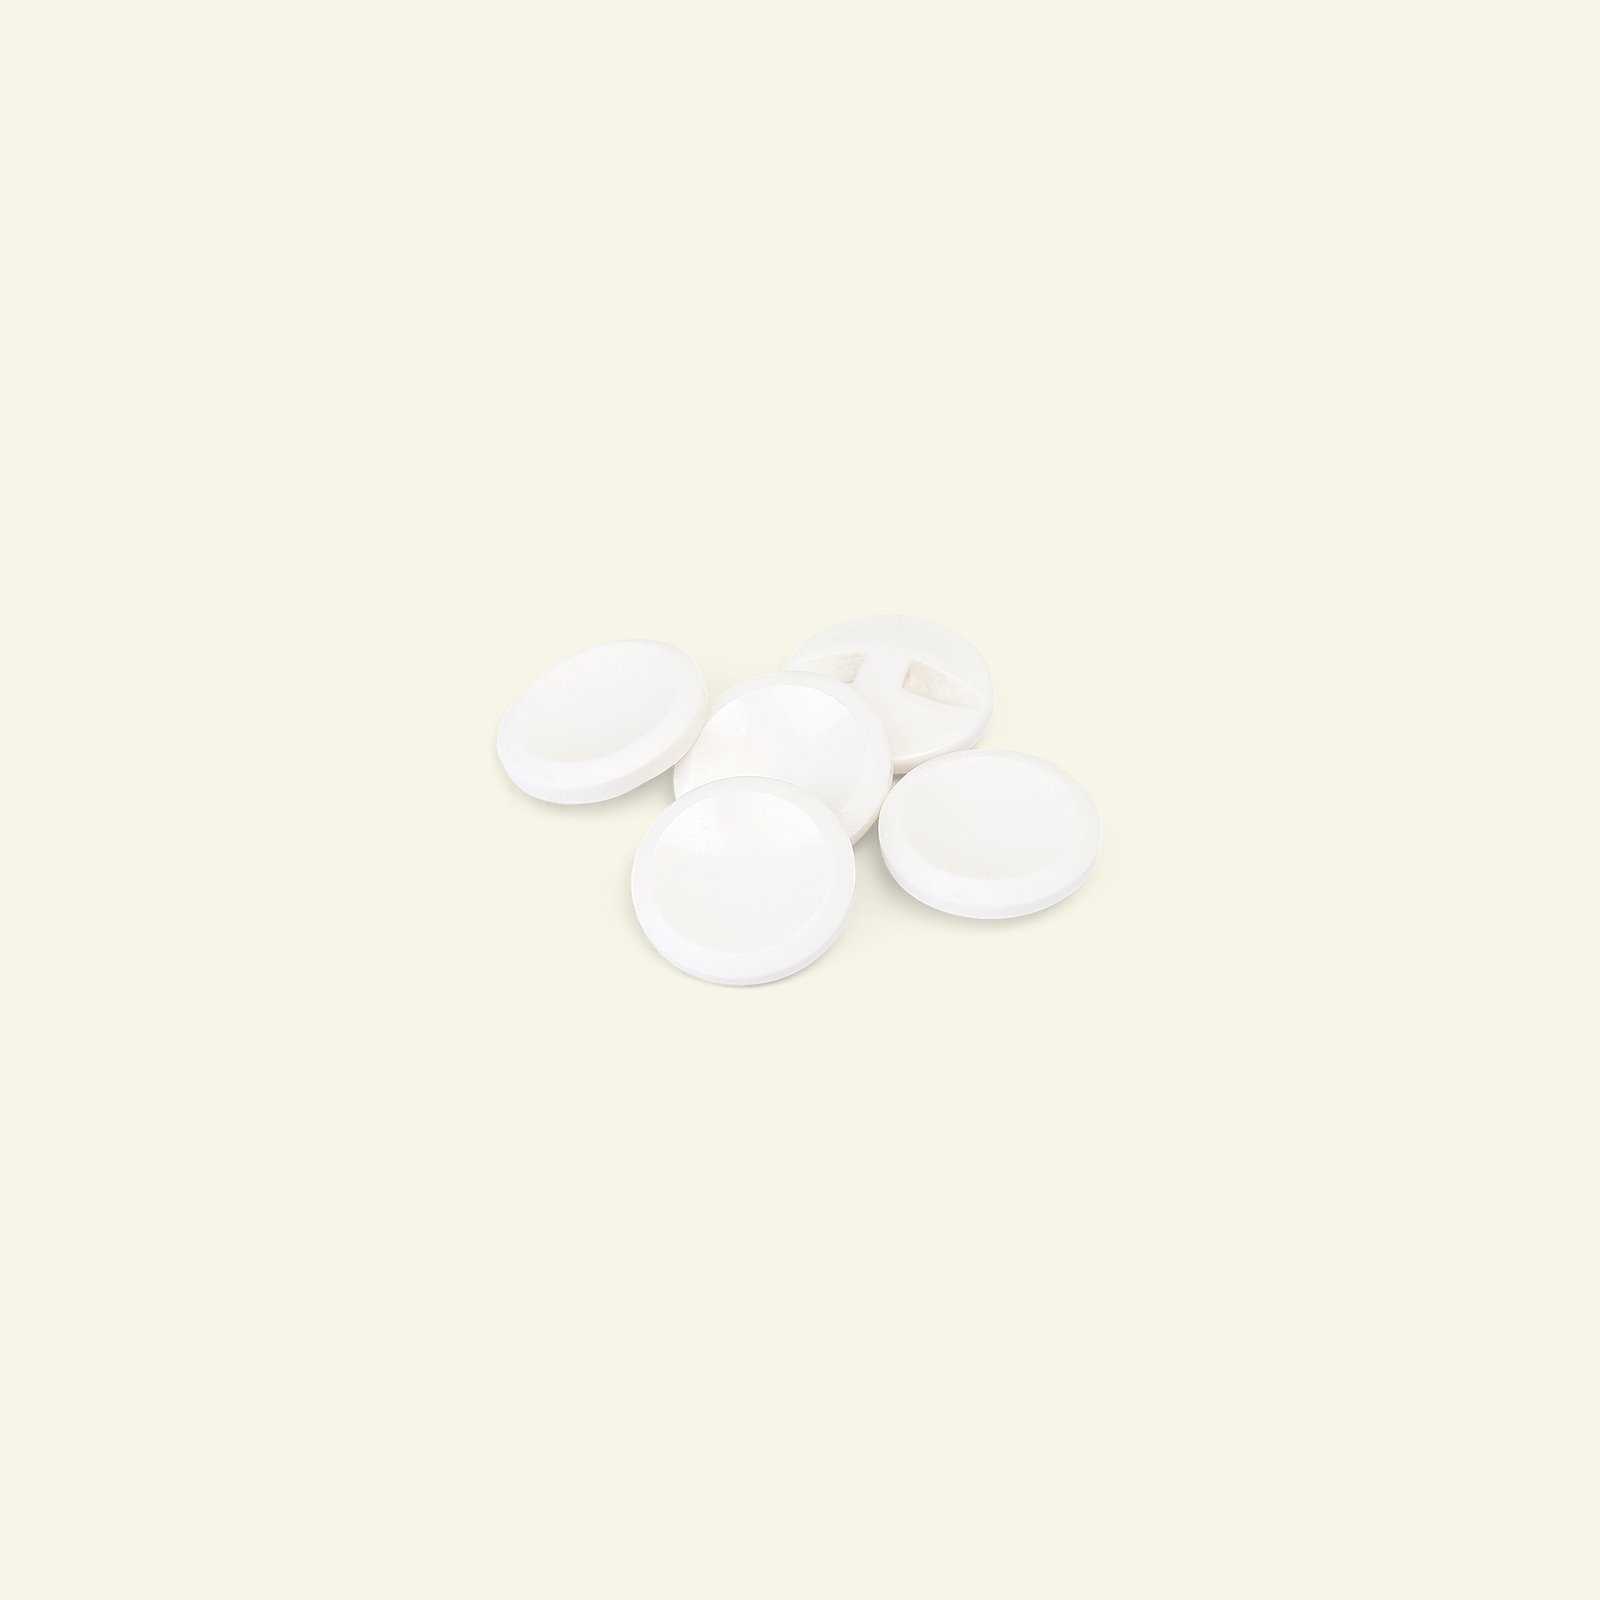 Shank button 15mm white 5pcs 33075_pack